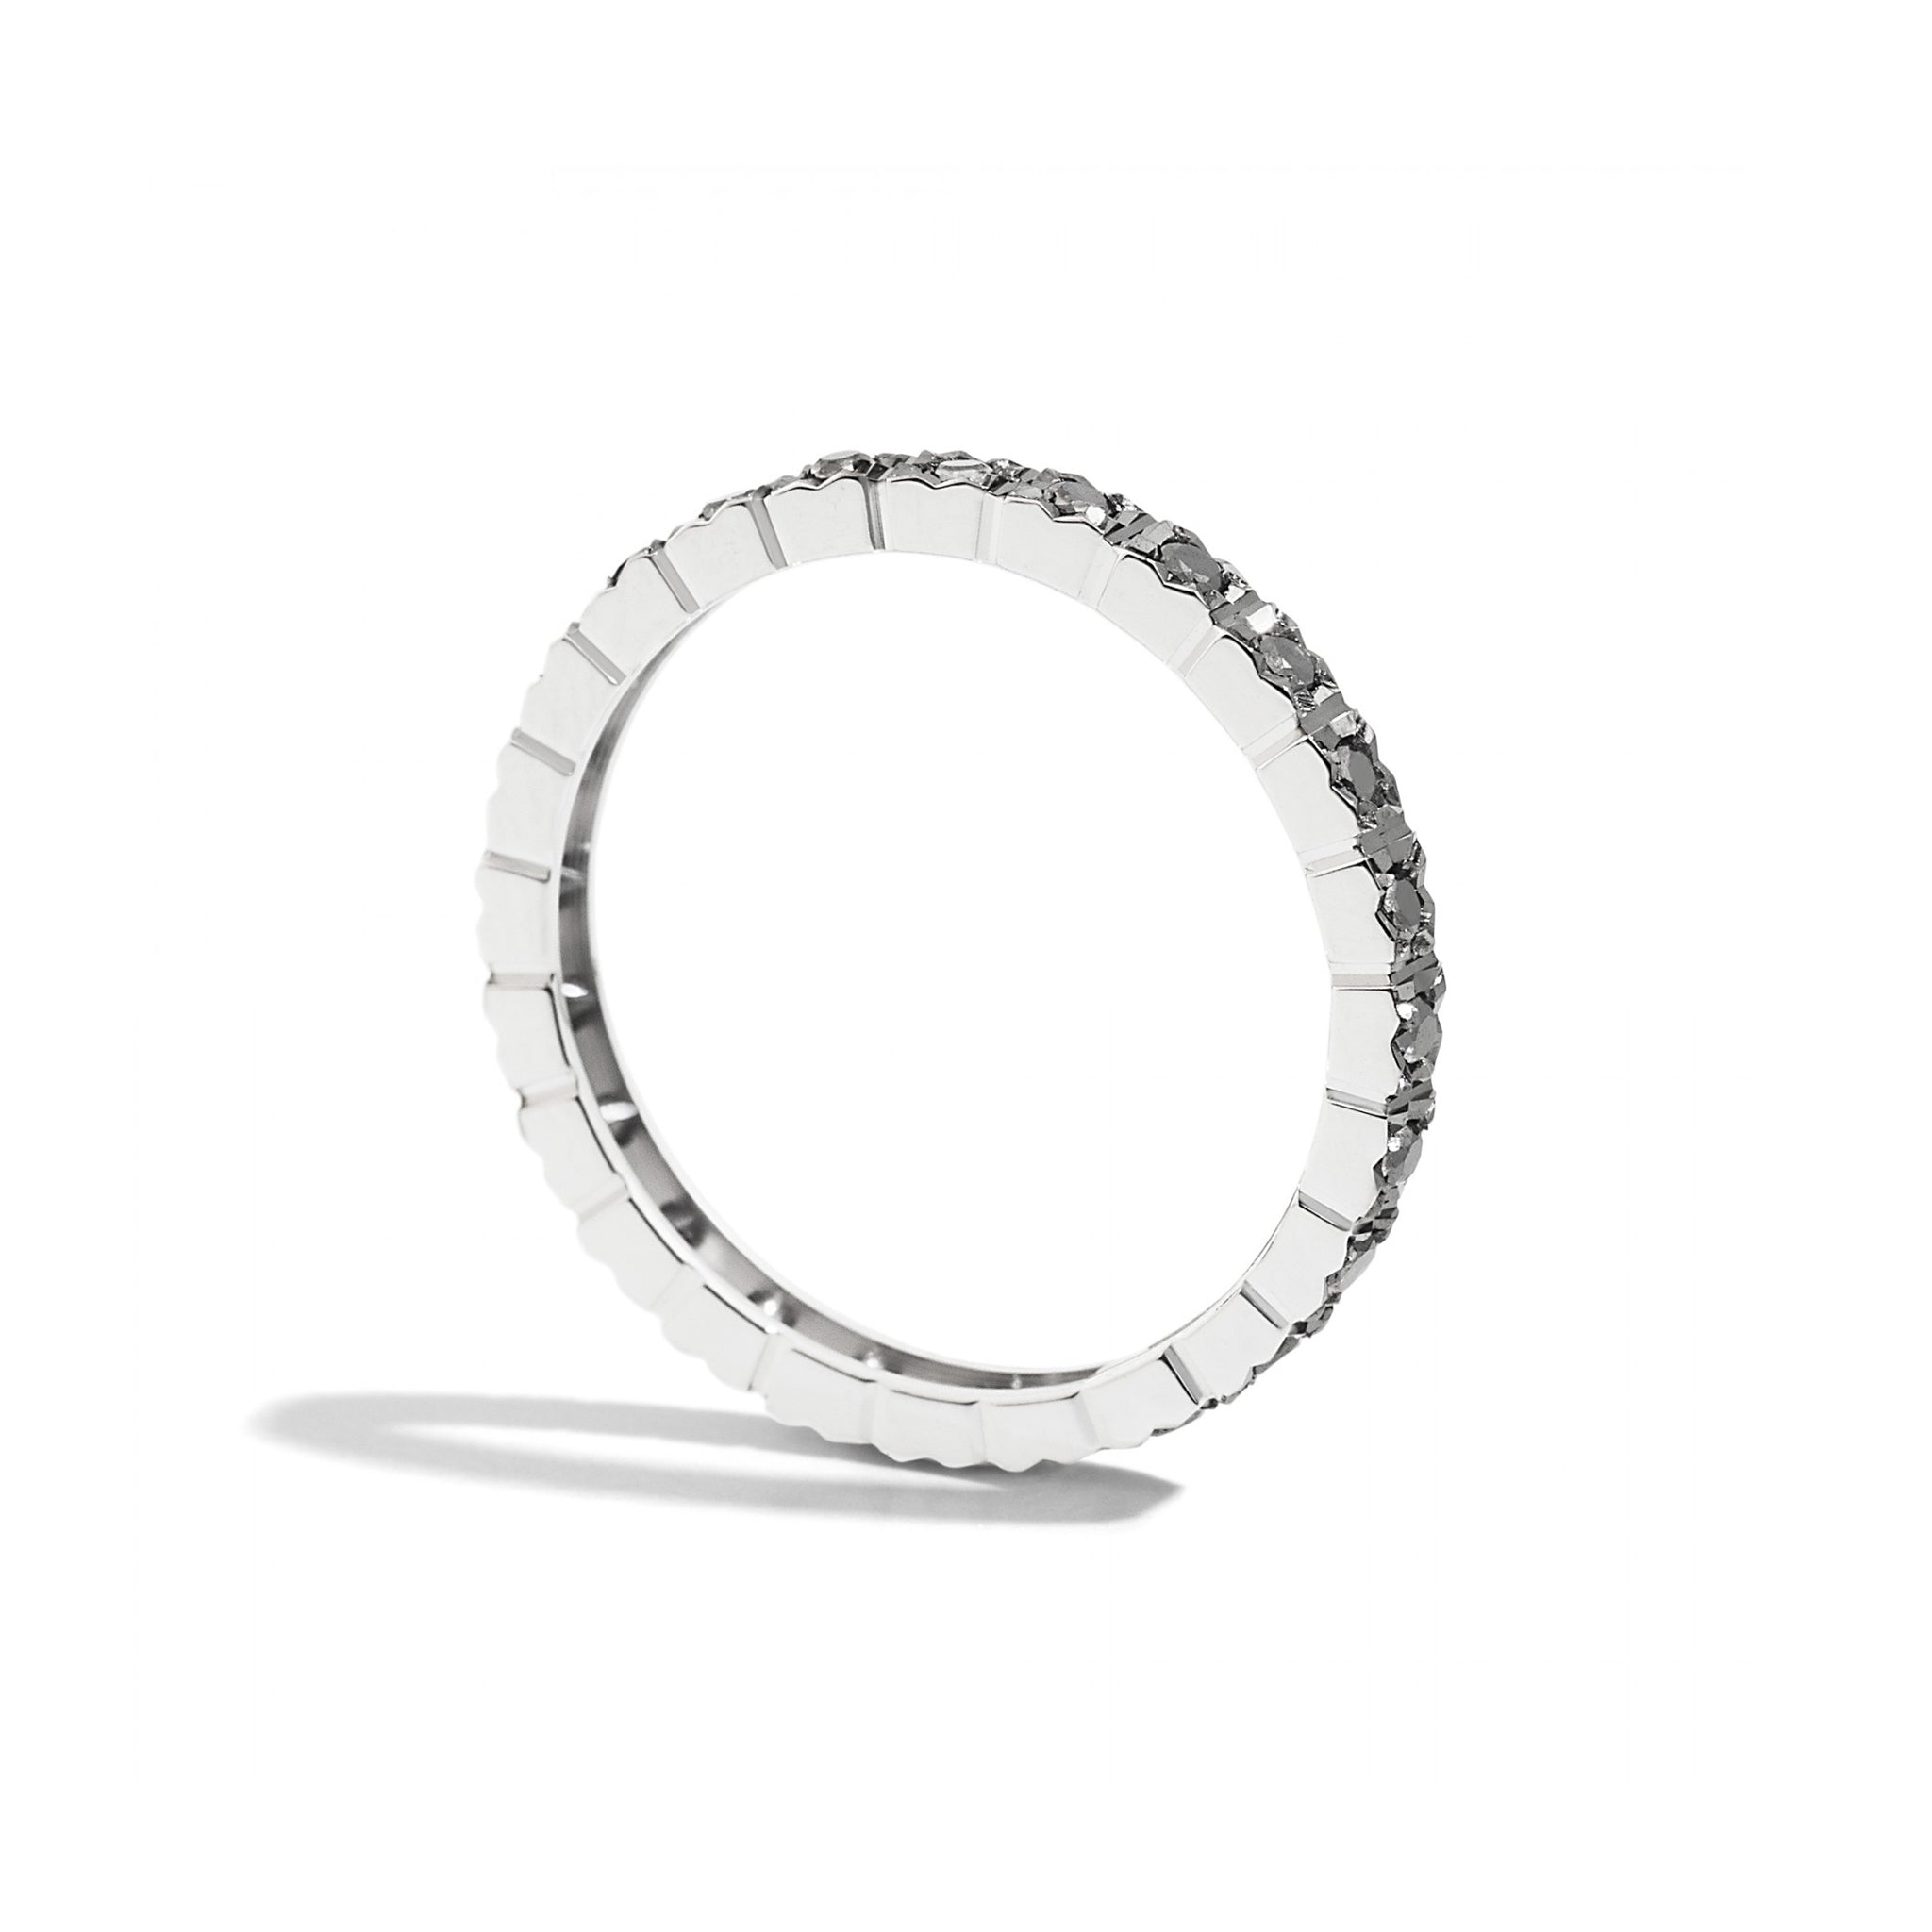 Eternity band in white gold and black diamonds, 0.45ct - R39GD906/DK045